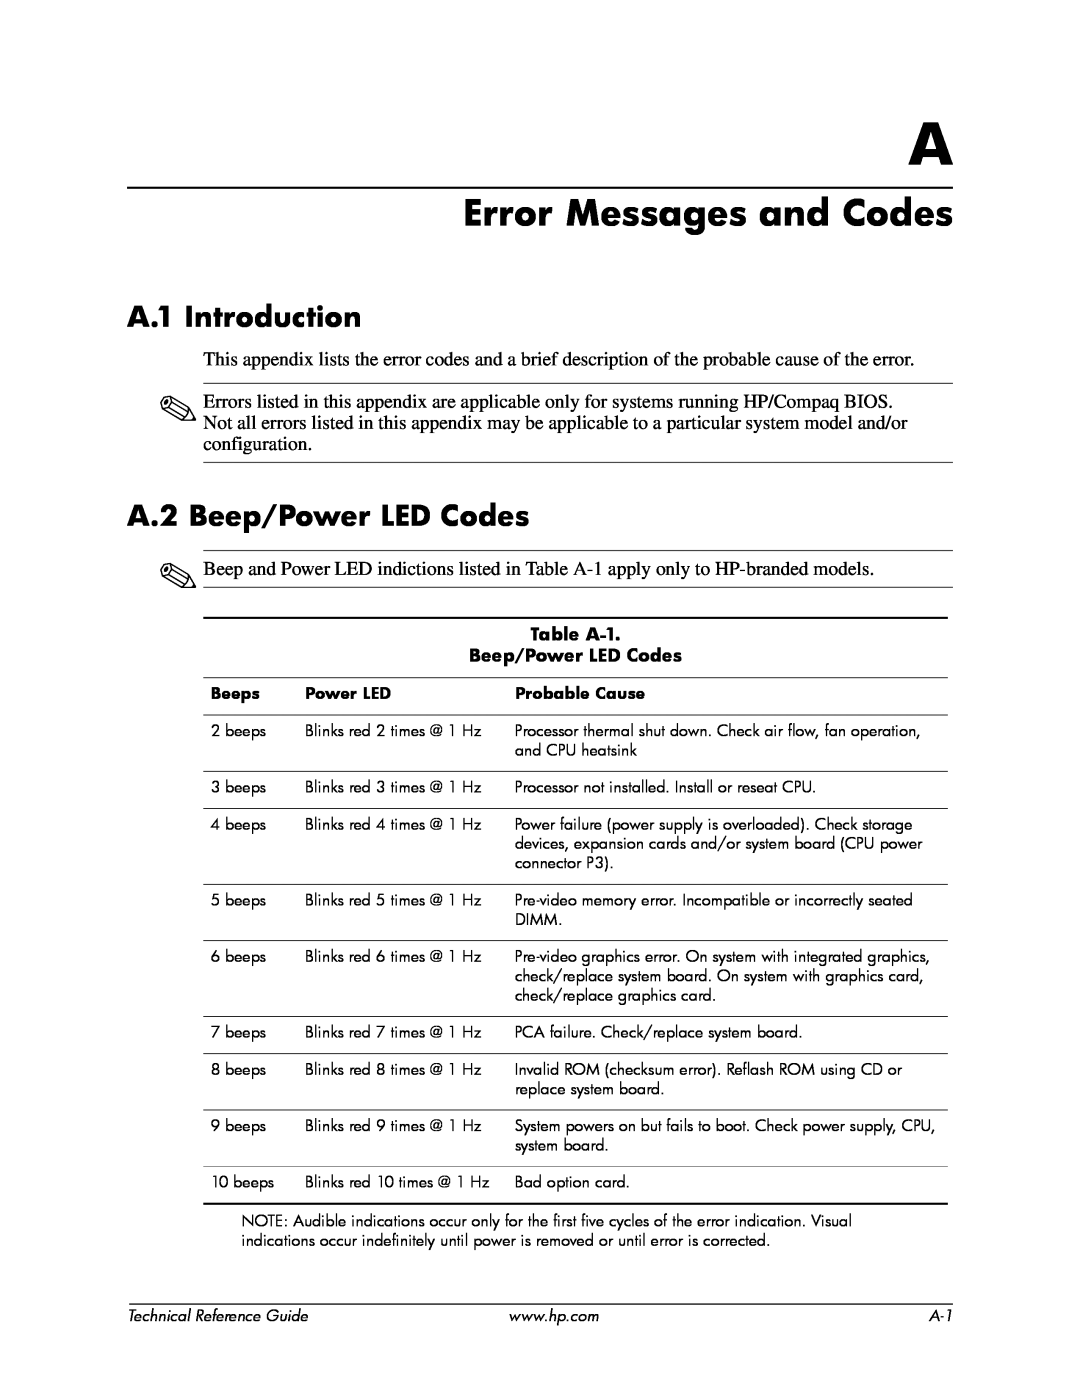 HP 8000 tower manual Error Messages and Codes, A.1 Introduction, A.2 Beep/Power LED Codes 